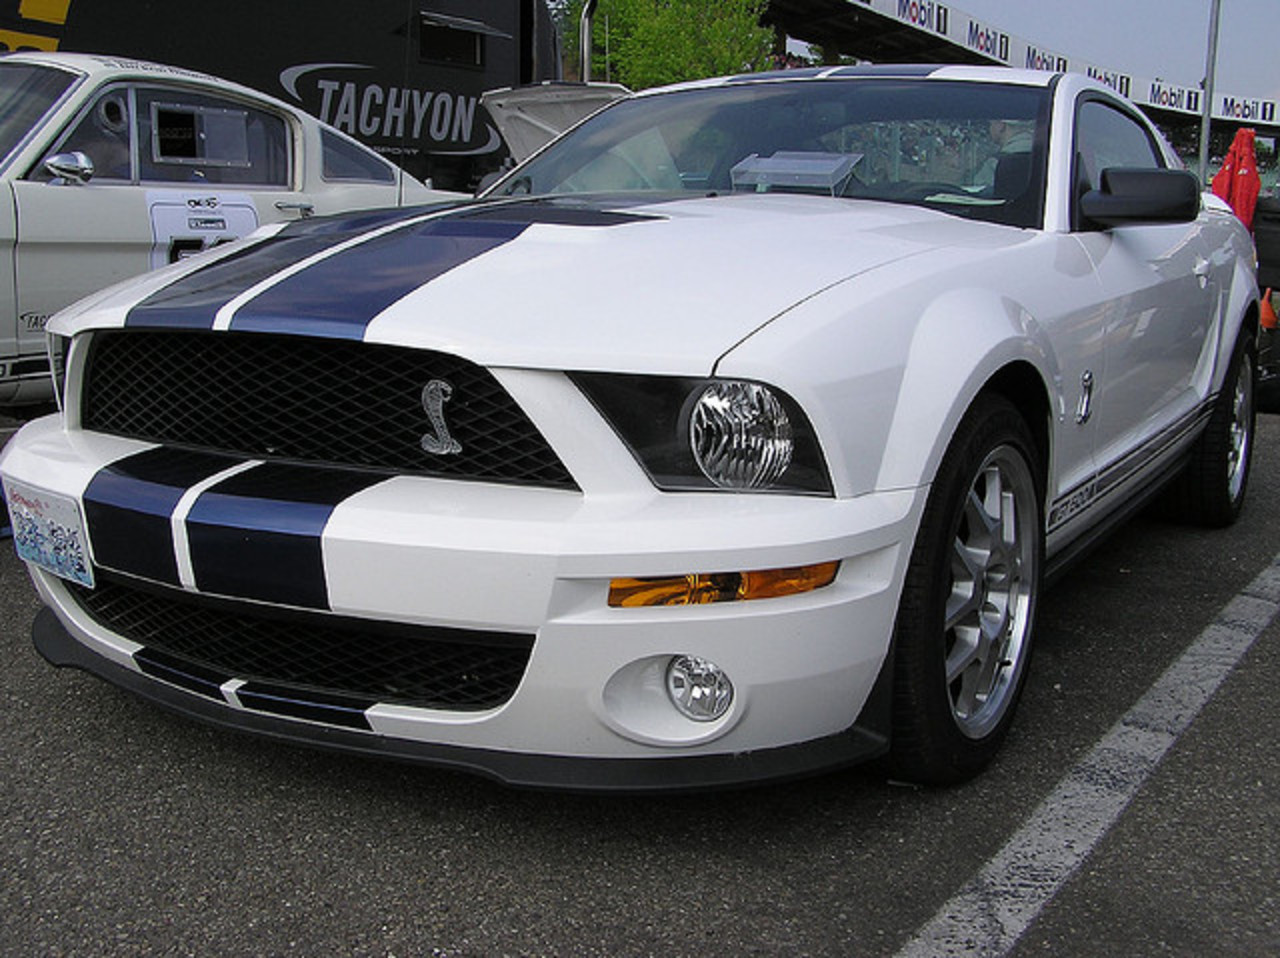 Ford Mustang Shelby GT 500 | Flickr - Photo Sharing!